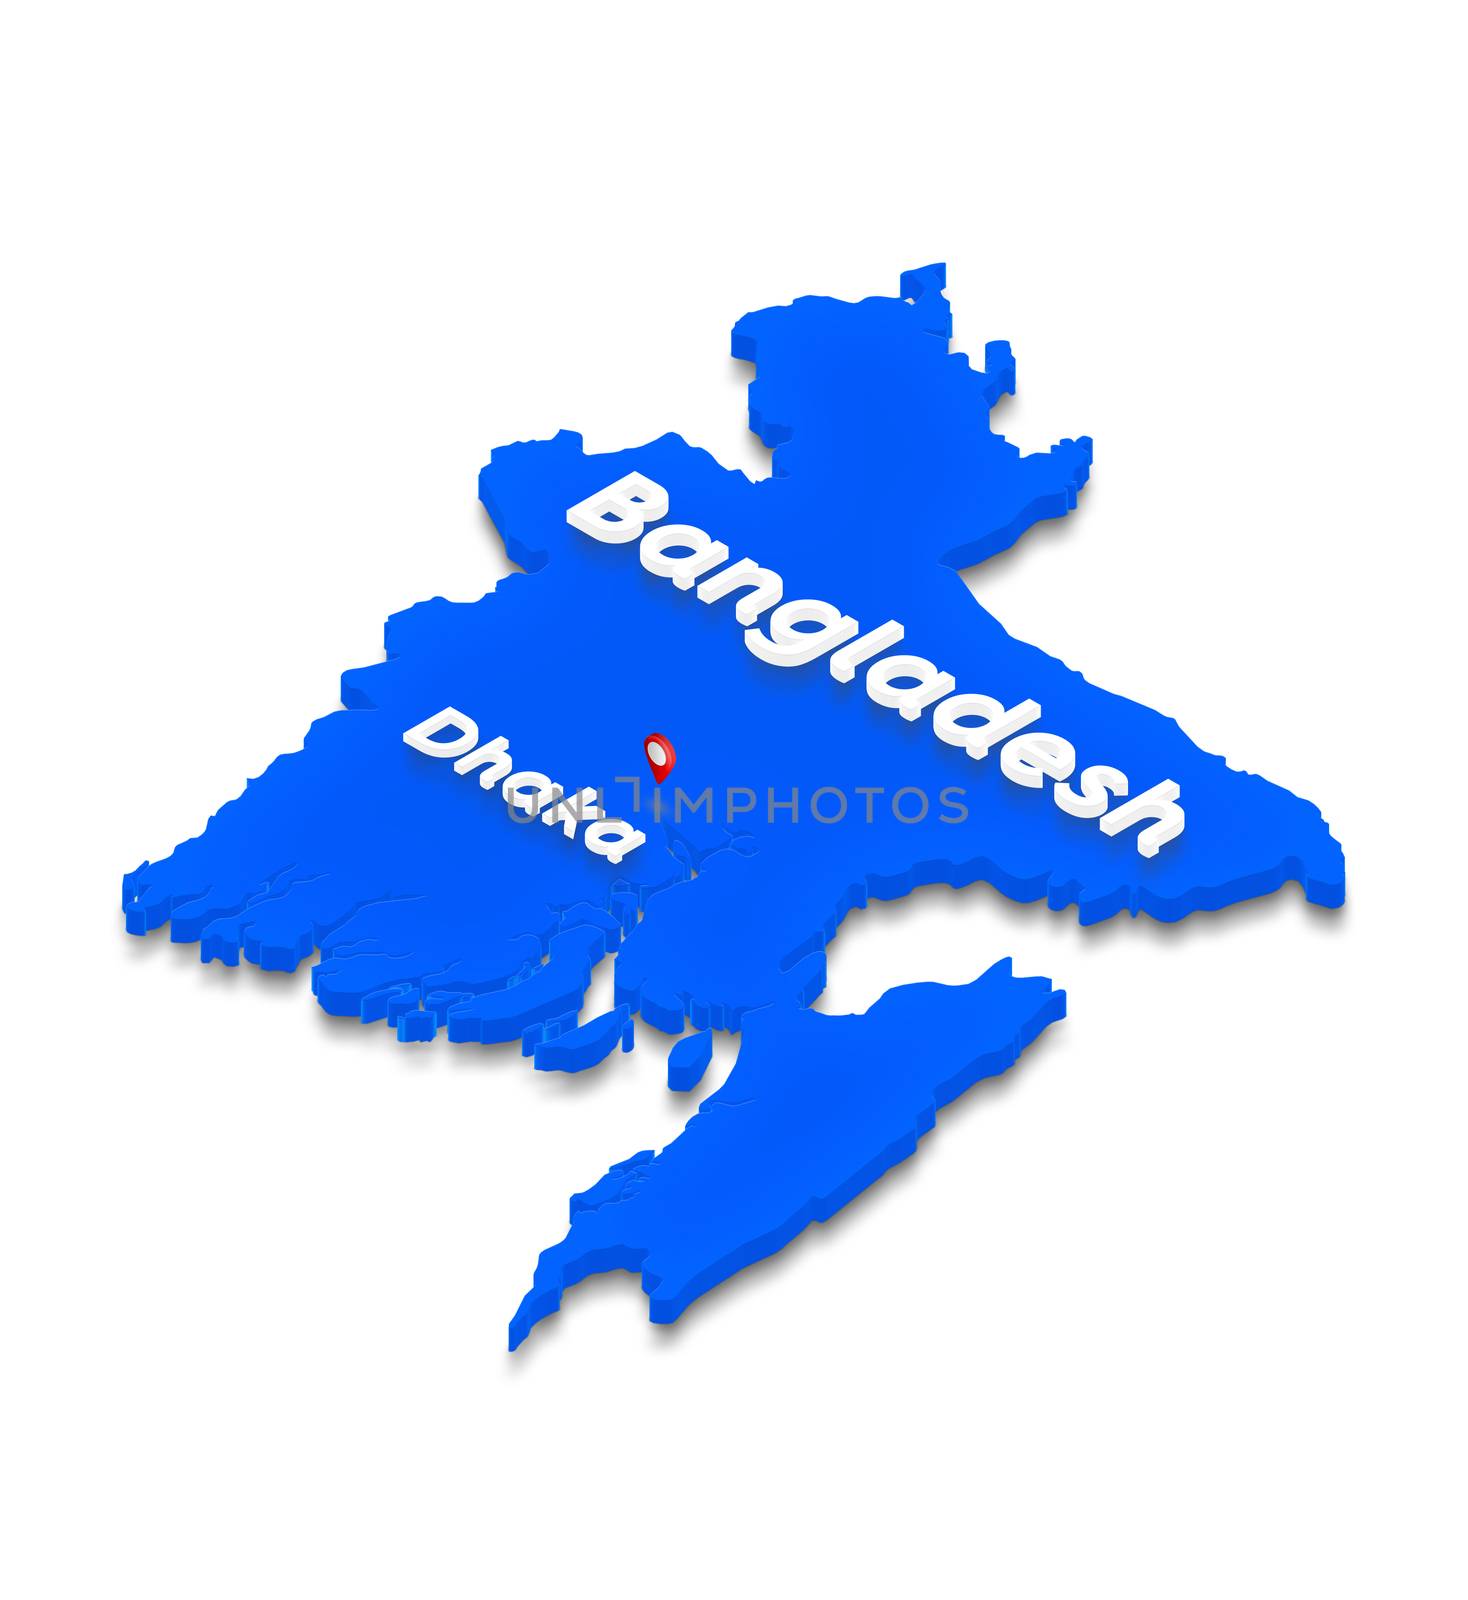 Illustration of a blue ground map of Bangladesh on white isolated background. Left 3D isometric perspective projection with the name of country and capital Dhaka.